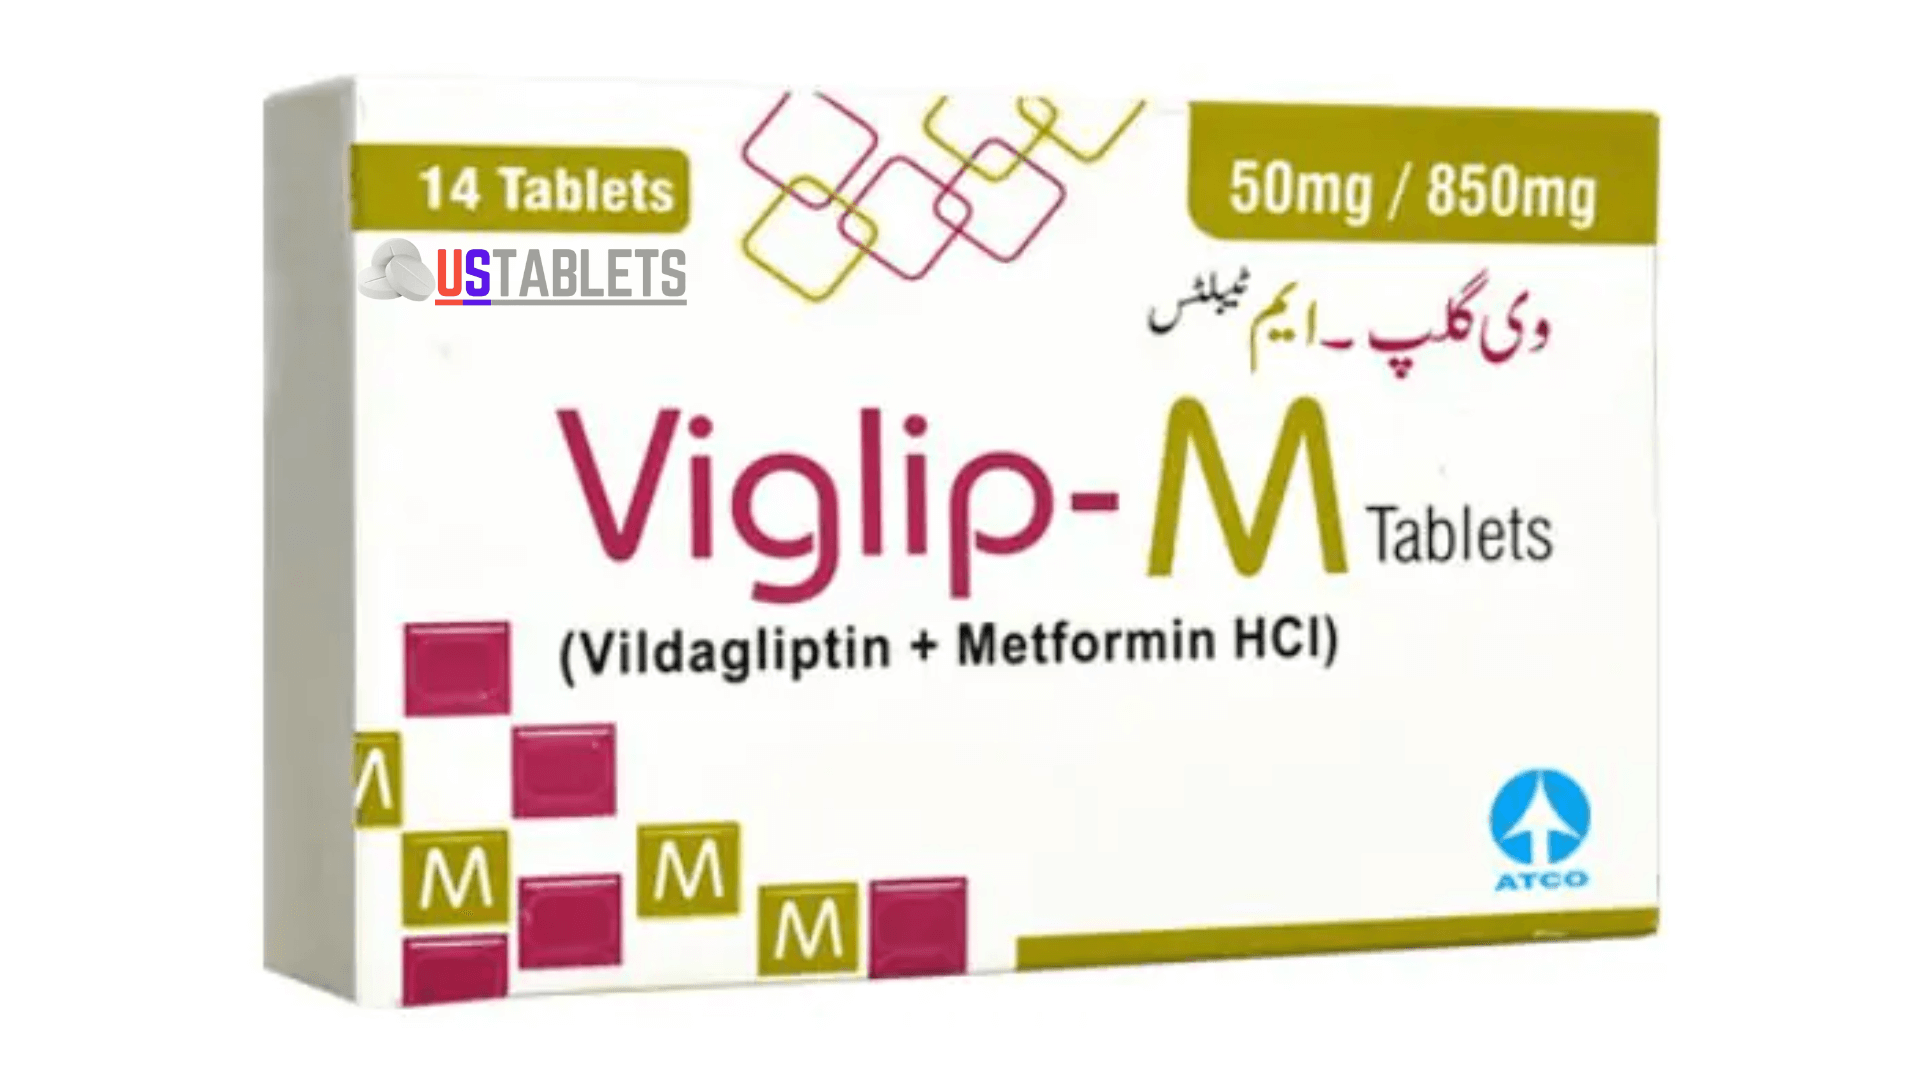 Viglip-M Tablet 50/850mg I Uses, Side Effects, Price & Availability